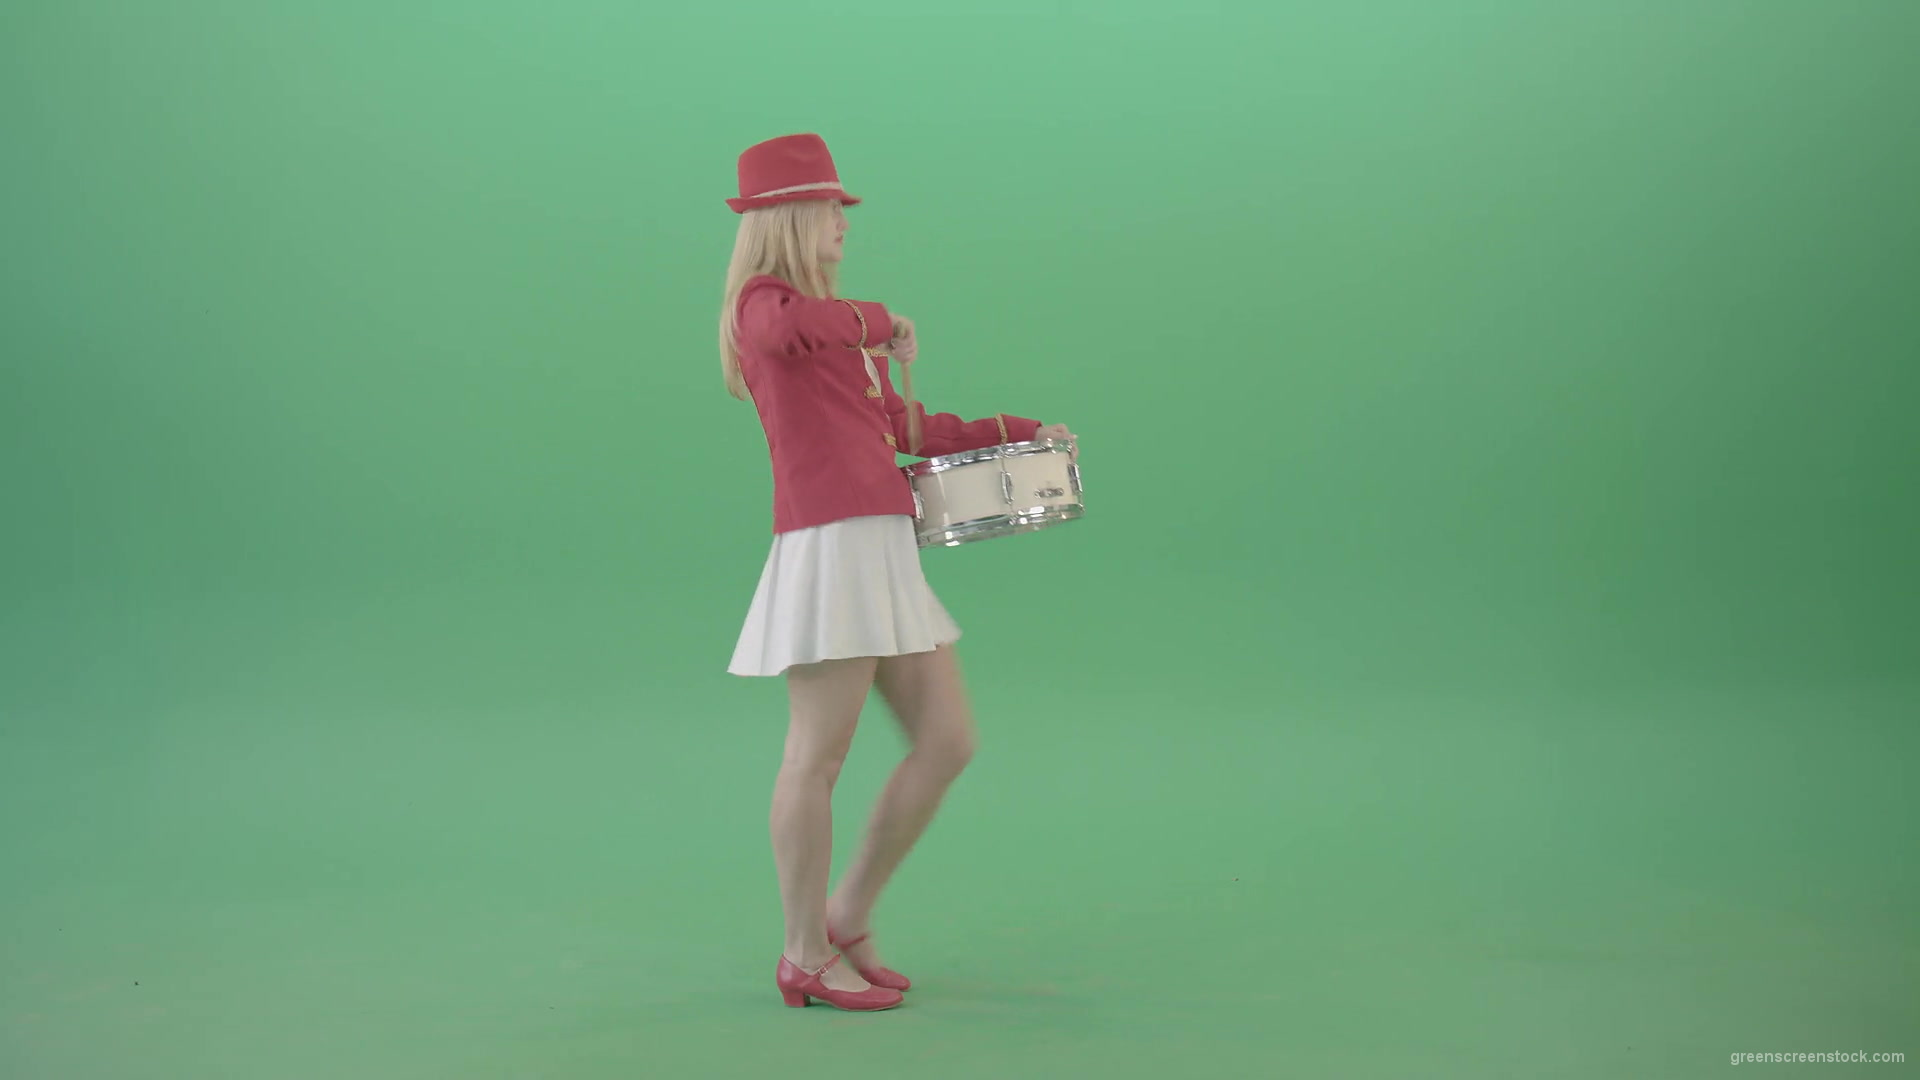 Side-view-marching-girl-play-white-snare-drum-in-red-uniform-on-green-screen-Video-Footage-1920_002 Green Screen Stock